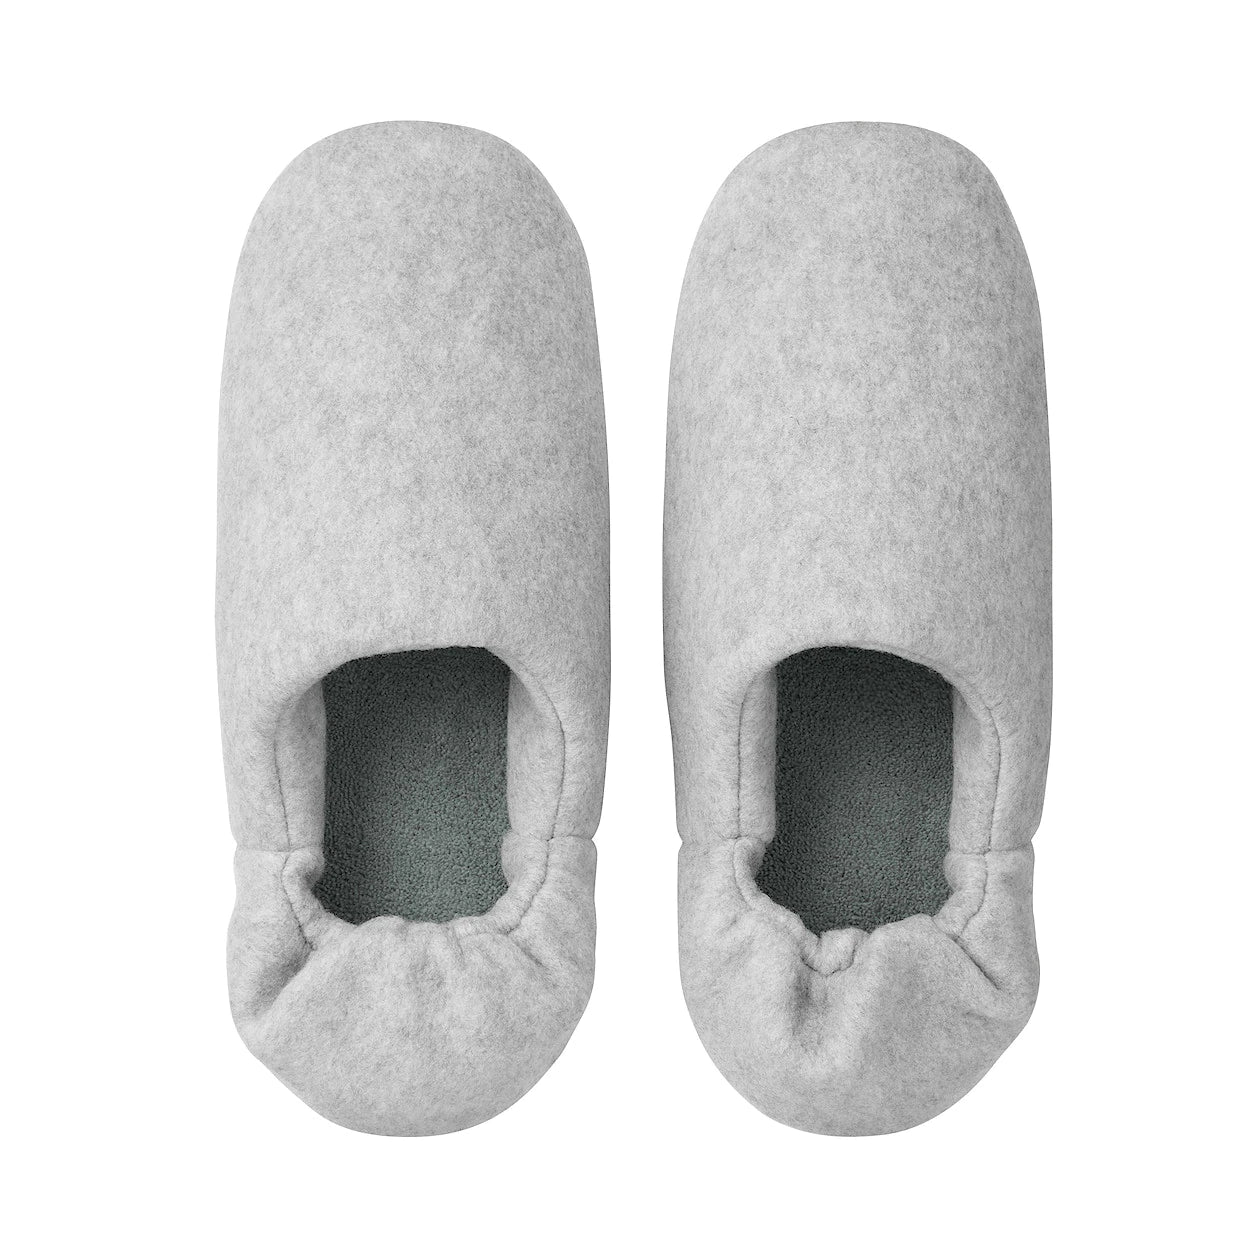 MUJI Lyocell blend knit room shoes slippers